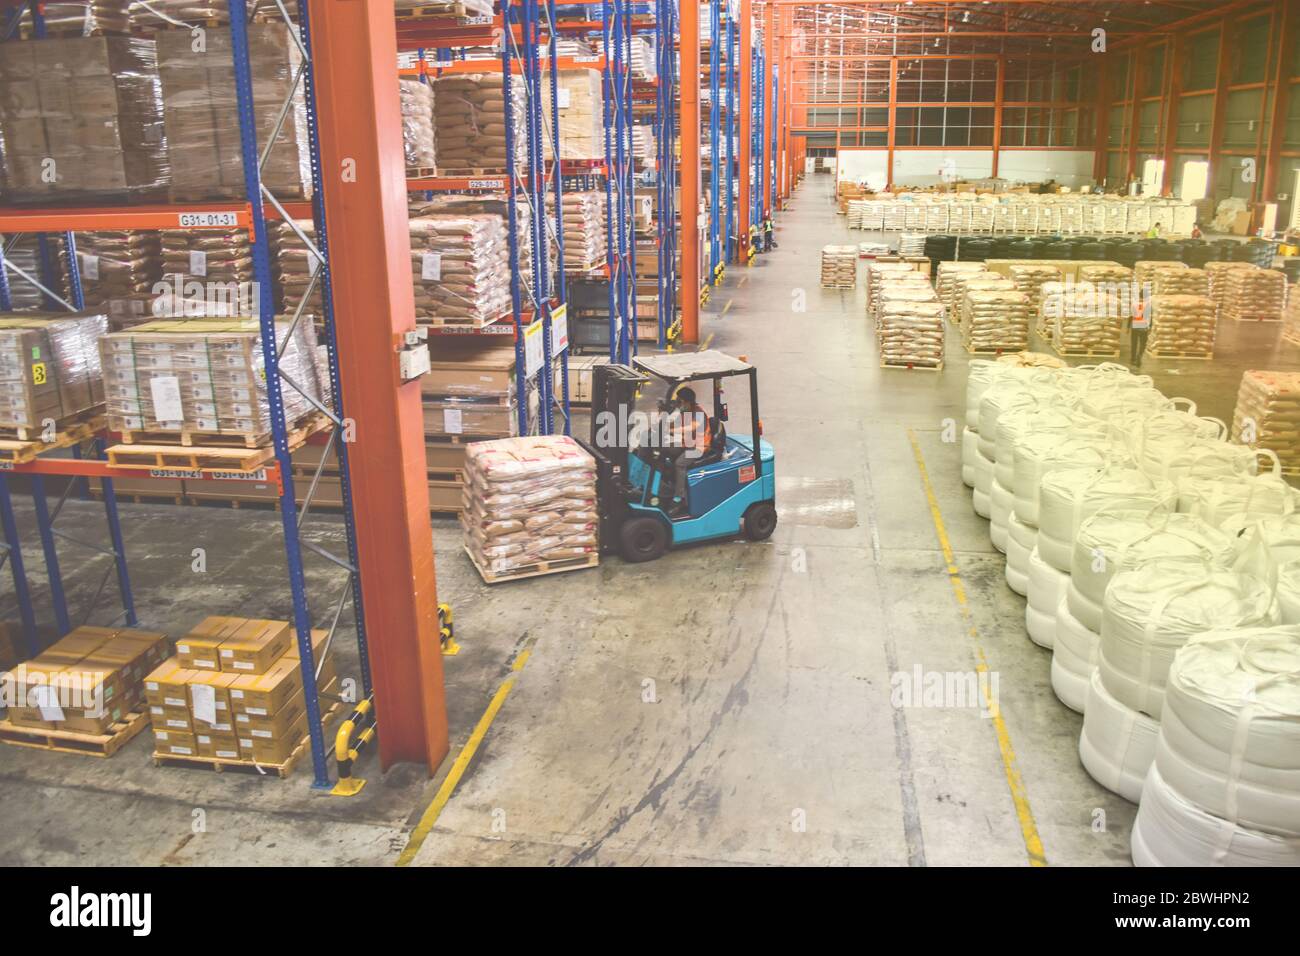 High view of cargo shorting area inside large distribution warehouse. Stock Photo